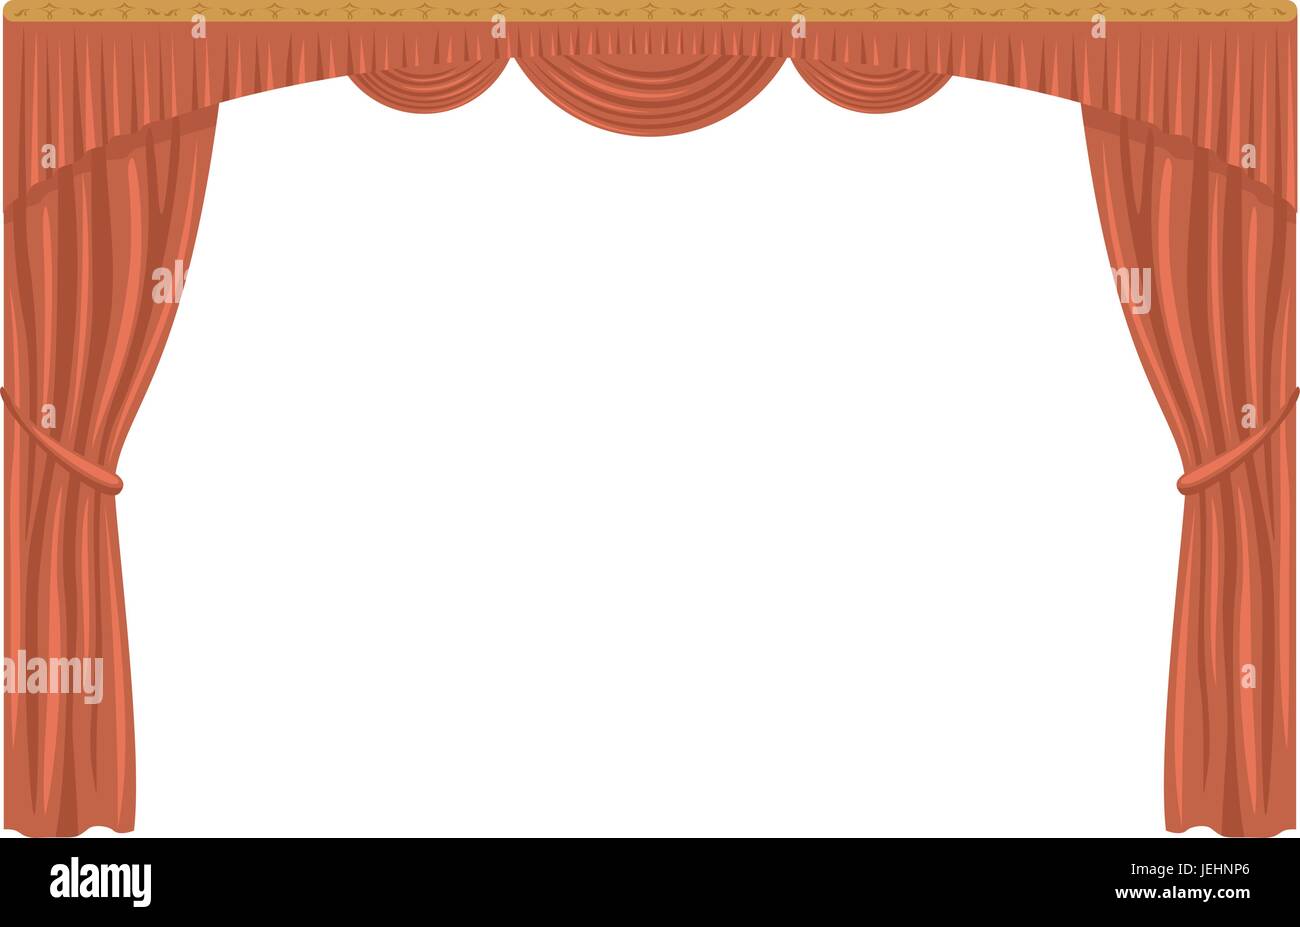 Victorian theatre stage Stock Vector Images - Alamy